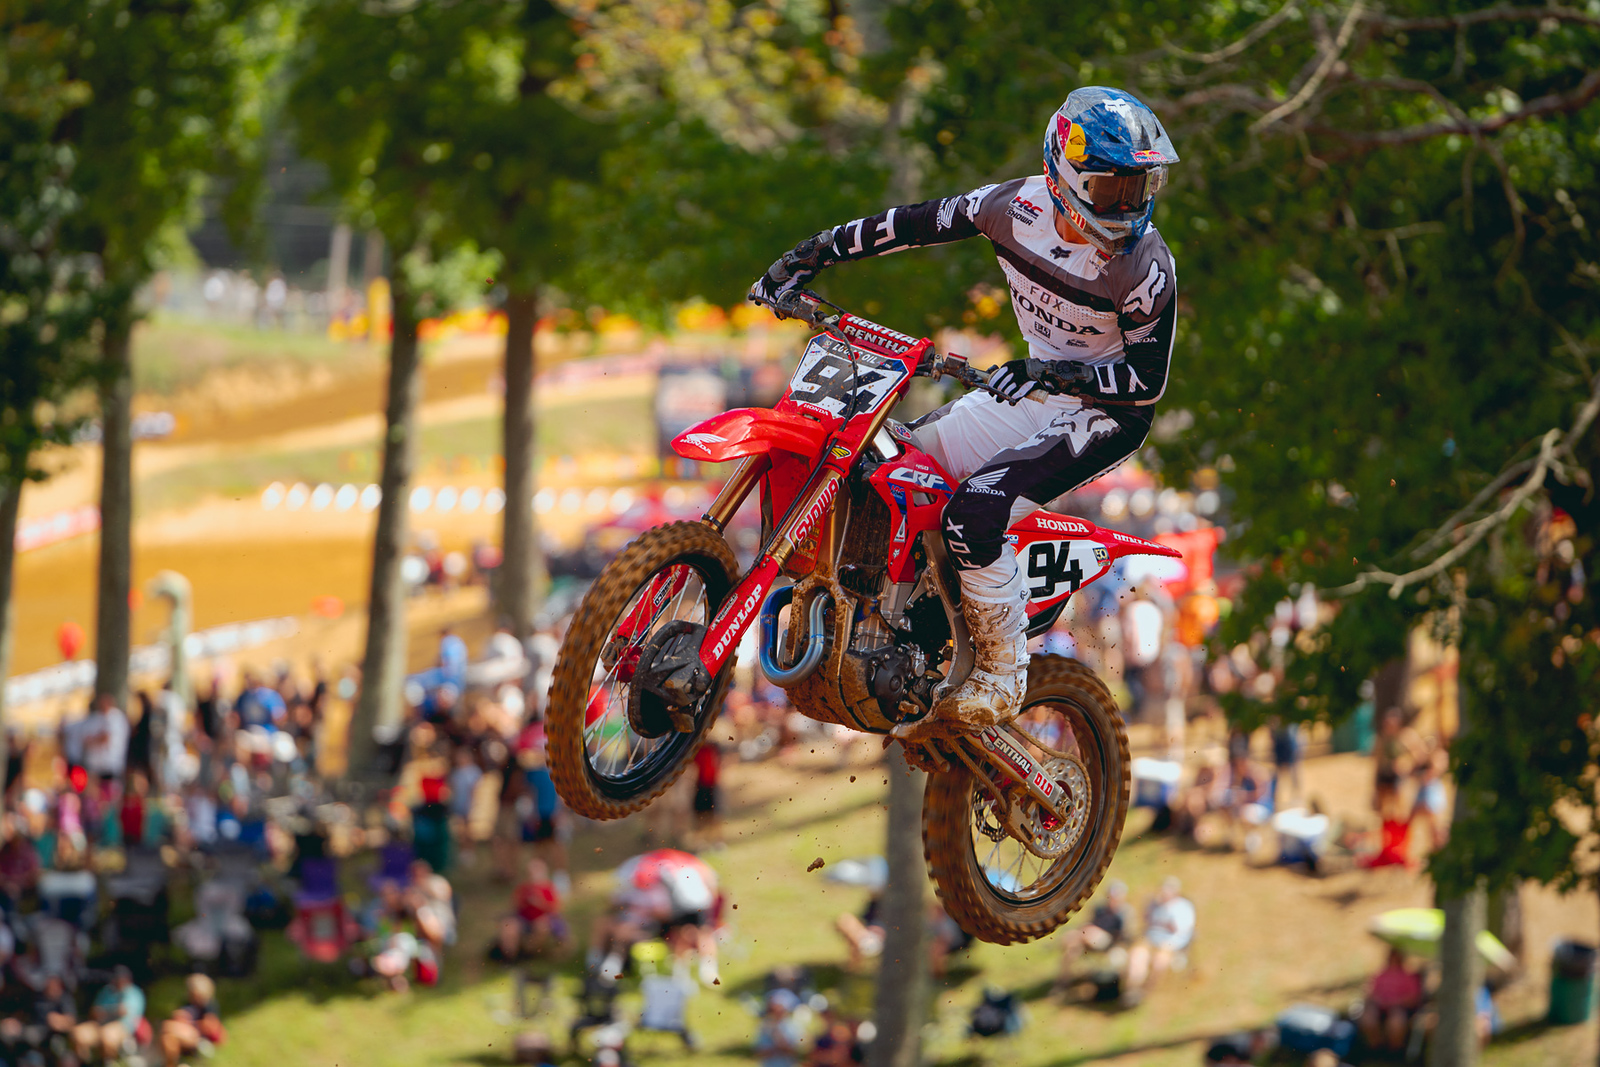 2022 Budds Creek Motocross Qualifying Report and Results